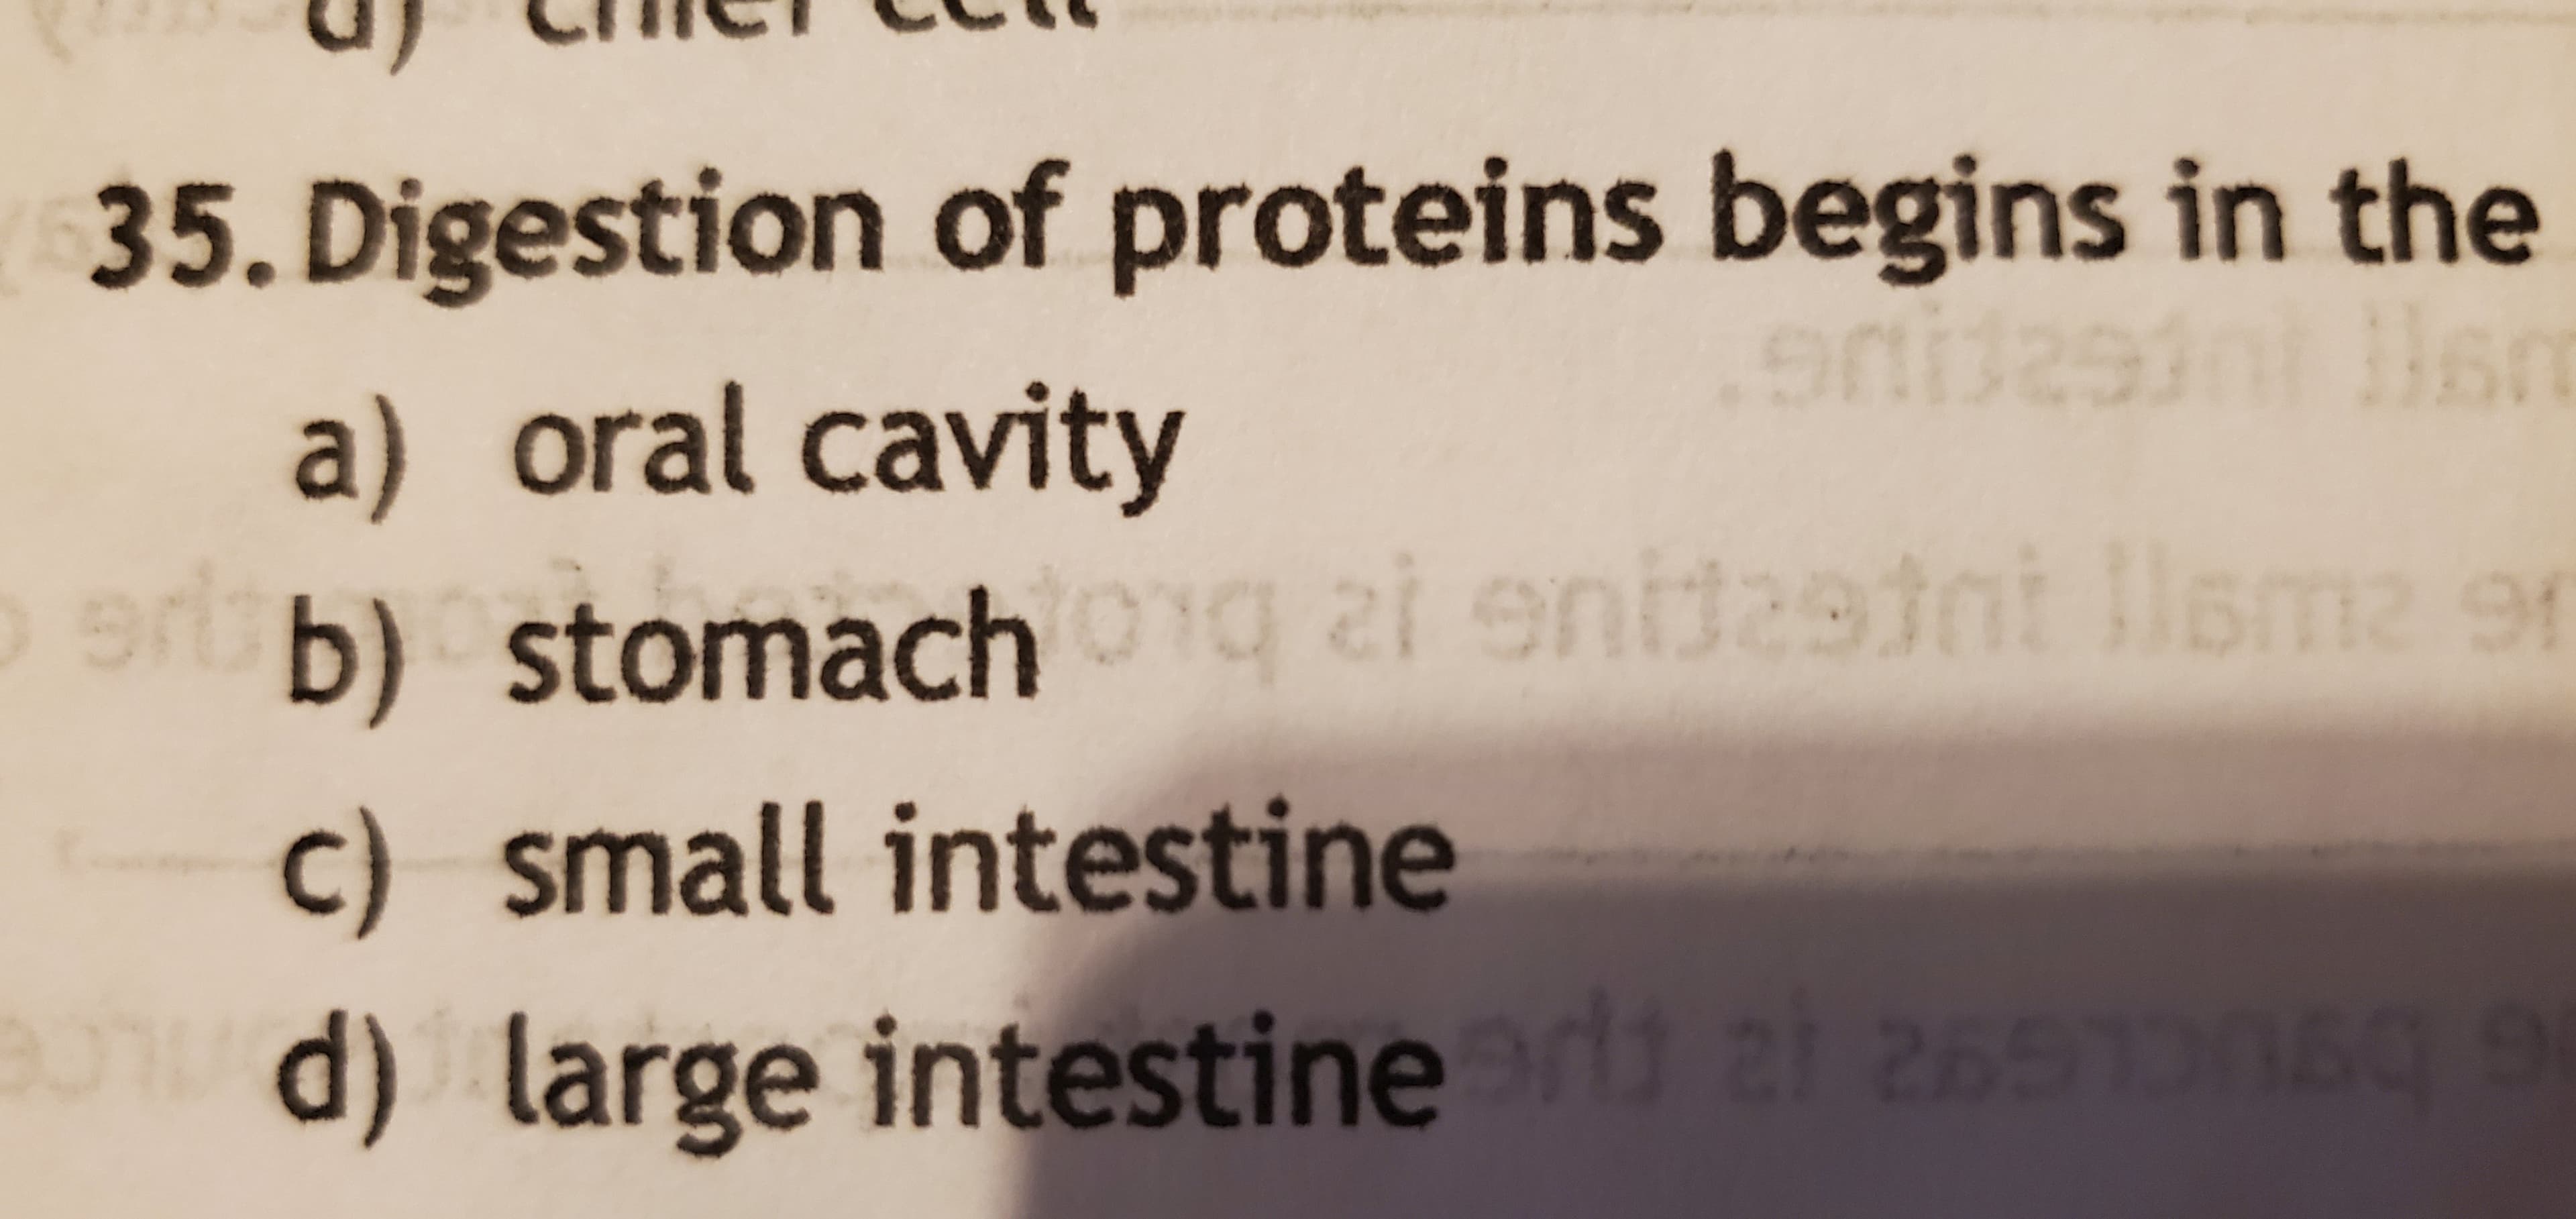 35. Digestion of proteins begins in the
a) oral cavity
UG
O ab) stomachng zi enidasint llema 91
c) small intestine
d) large intestine r ai 265T060 9
